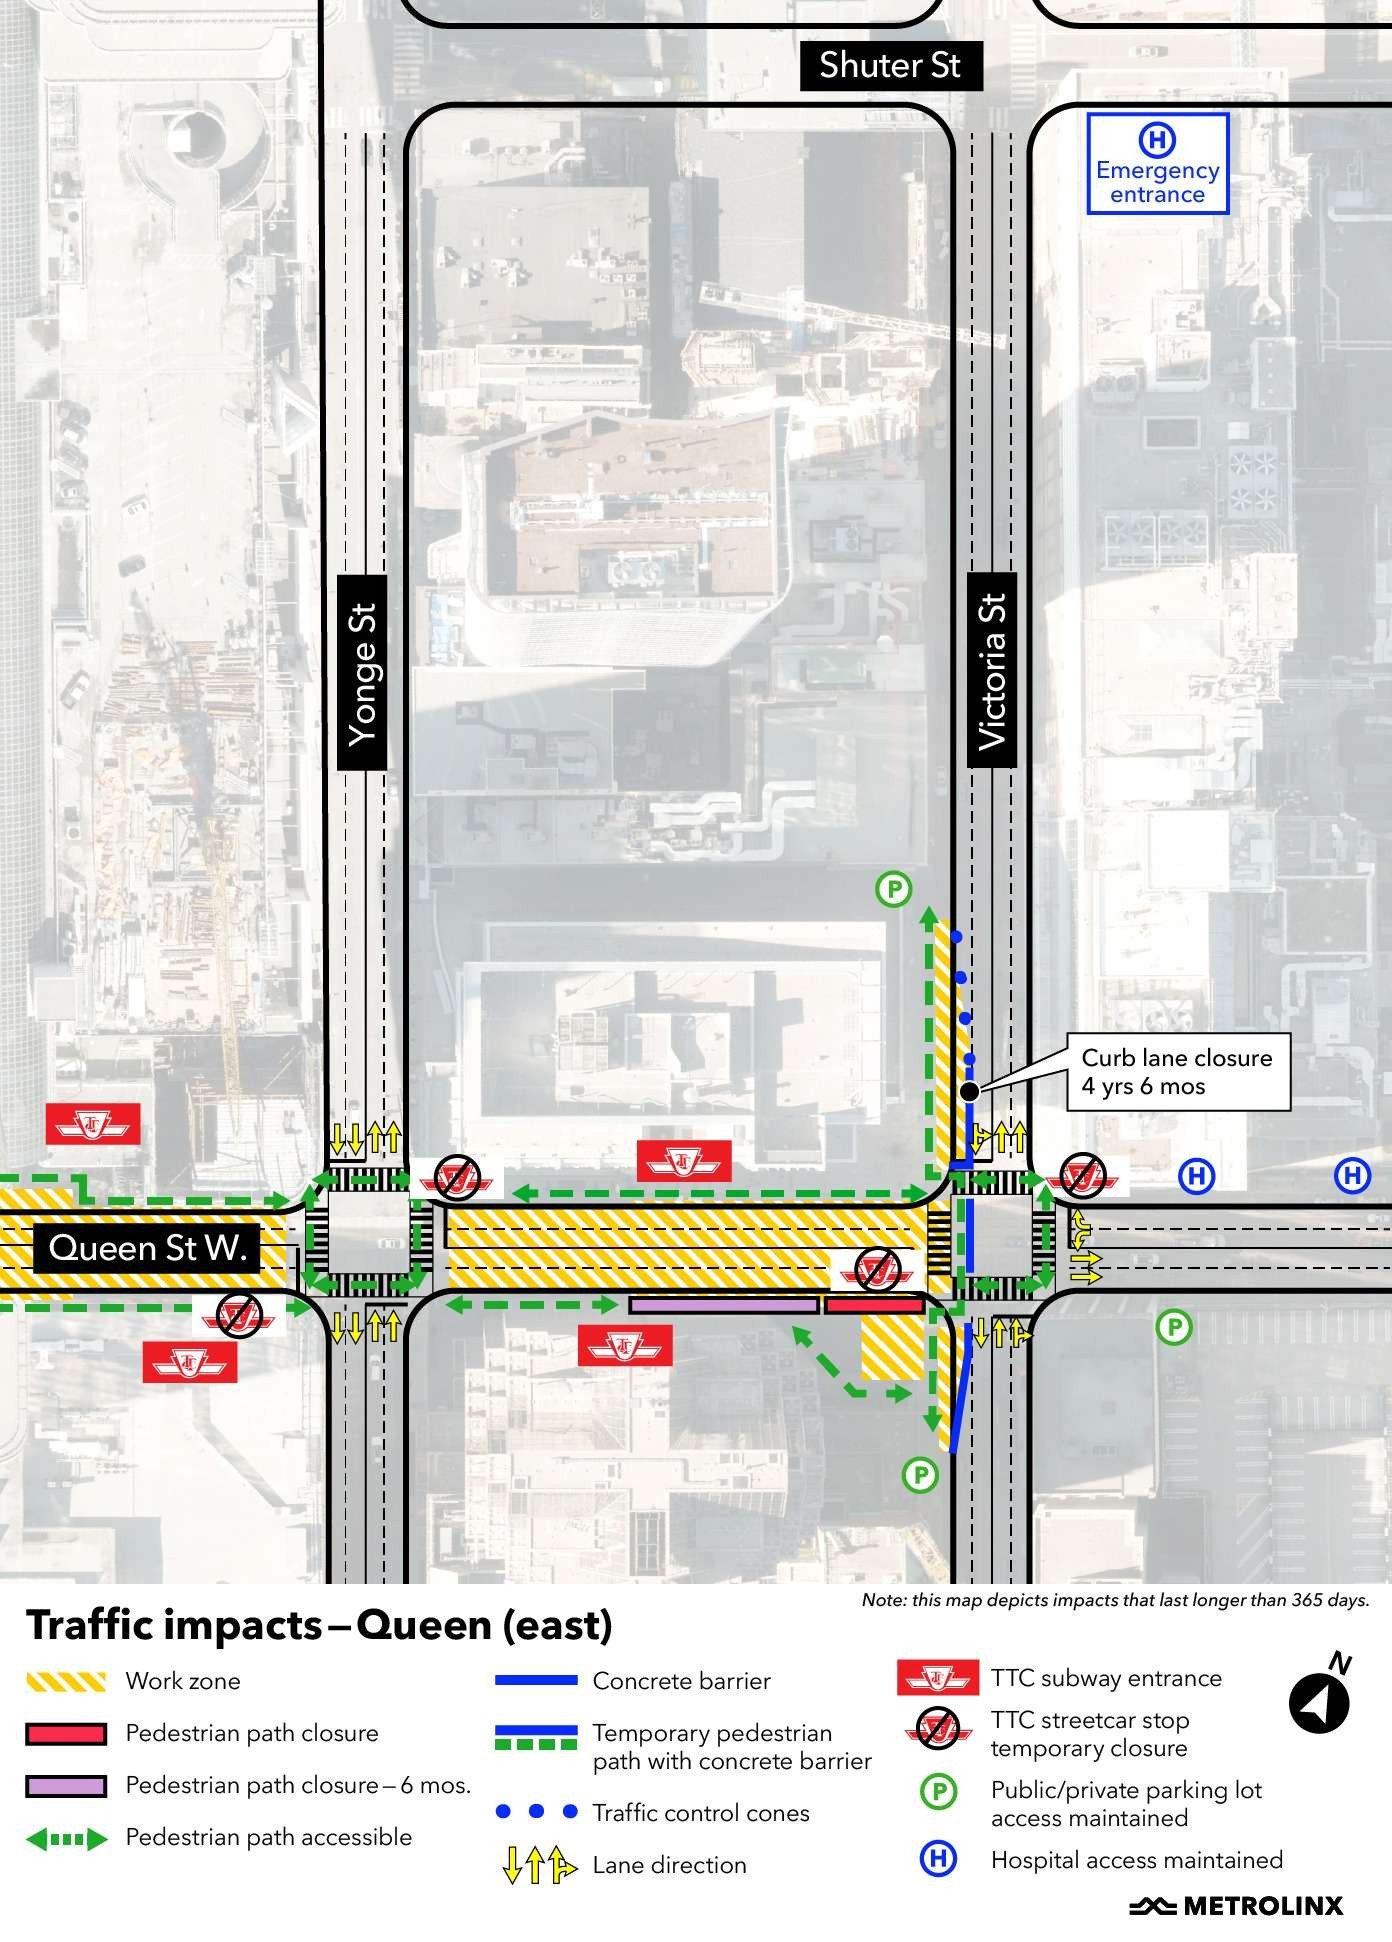 Construction Traffic Impact - Queen Station East